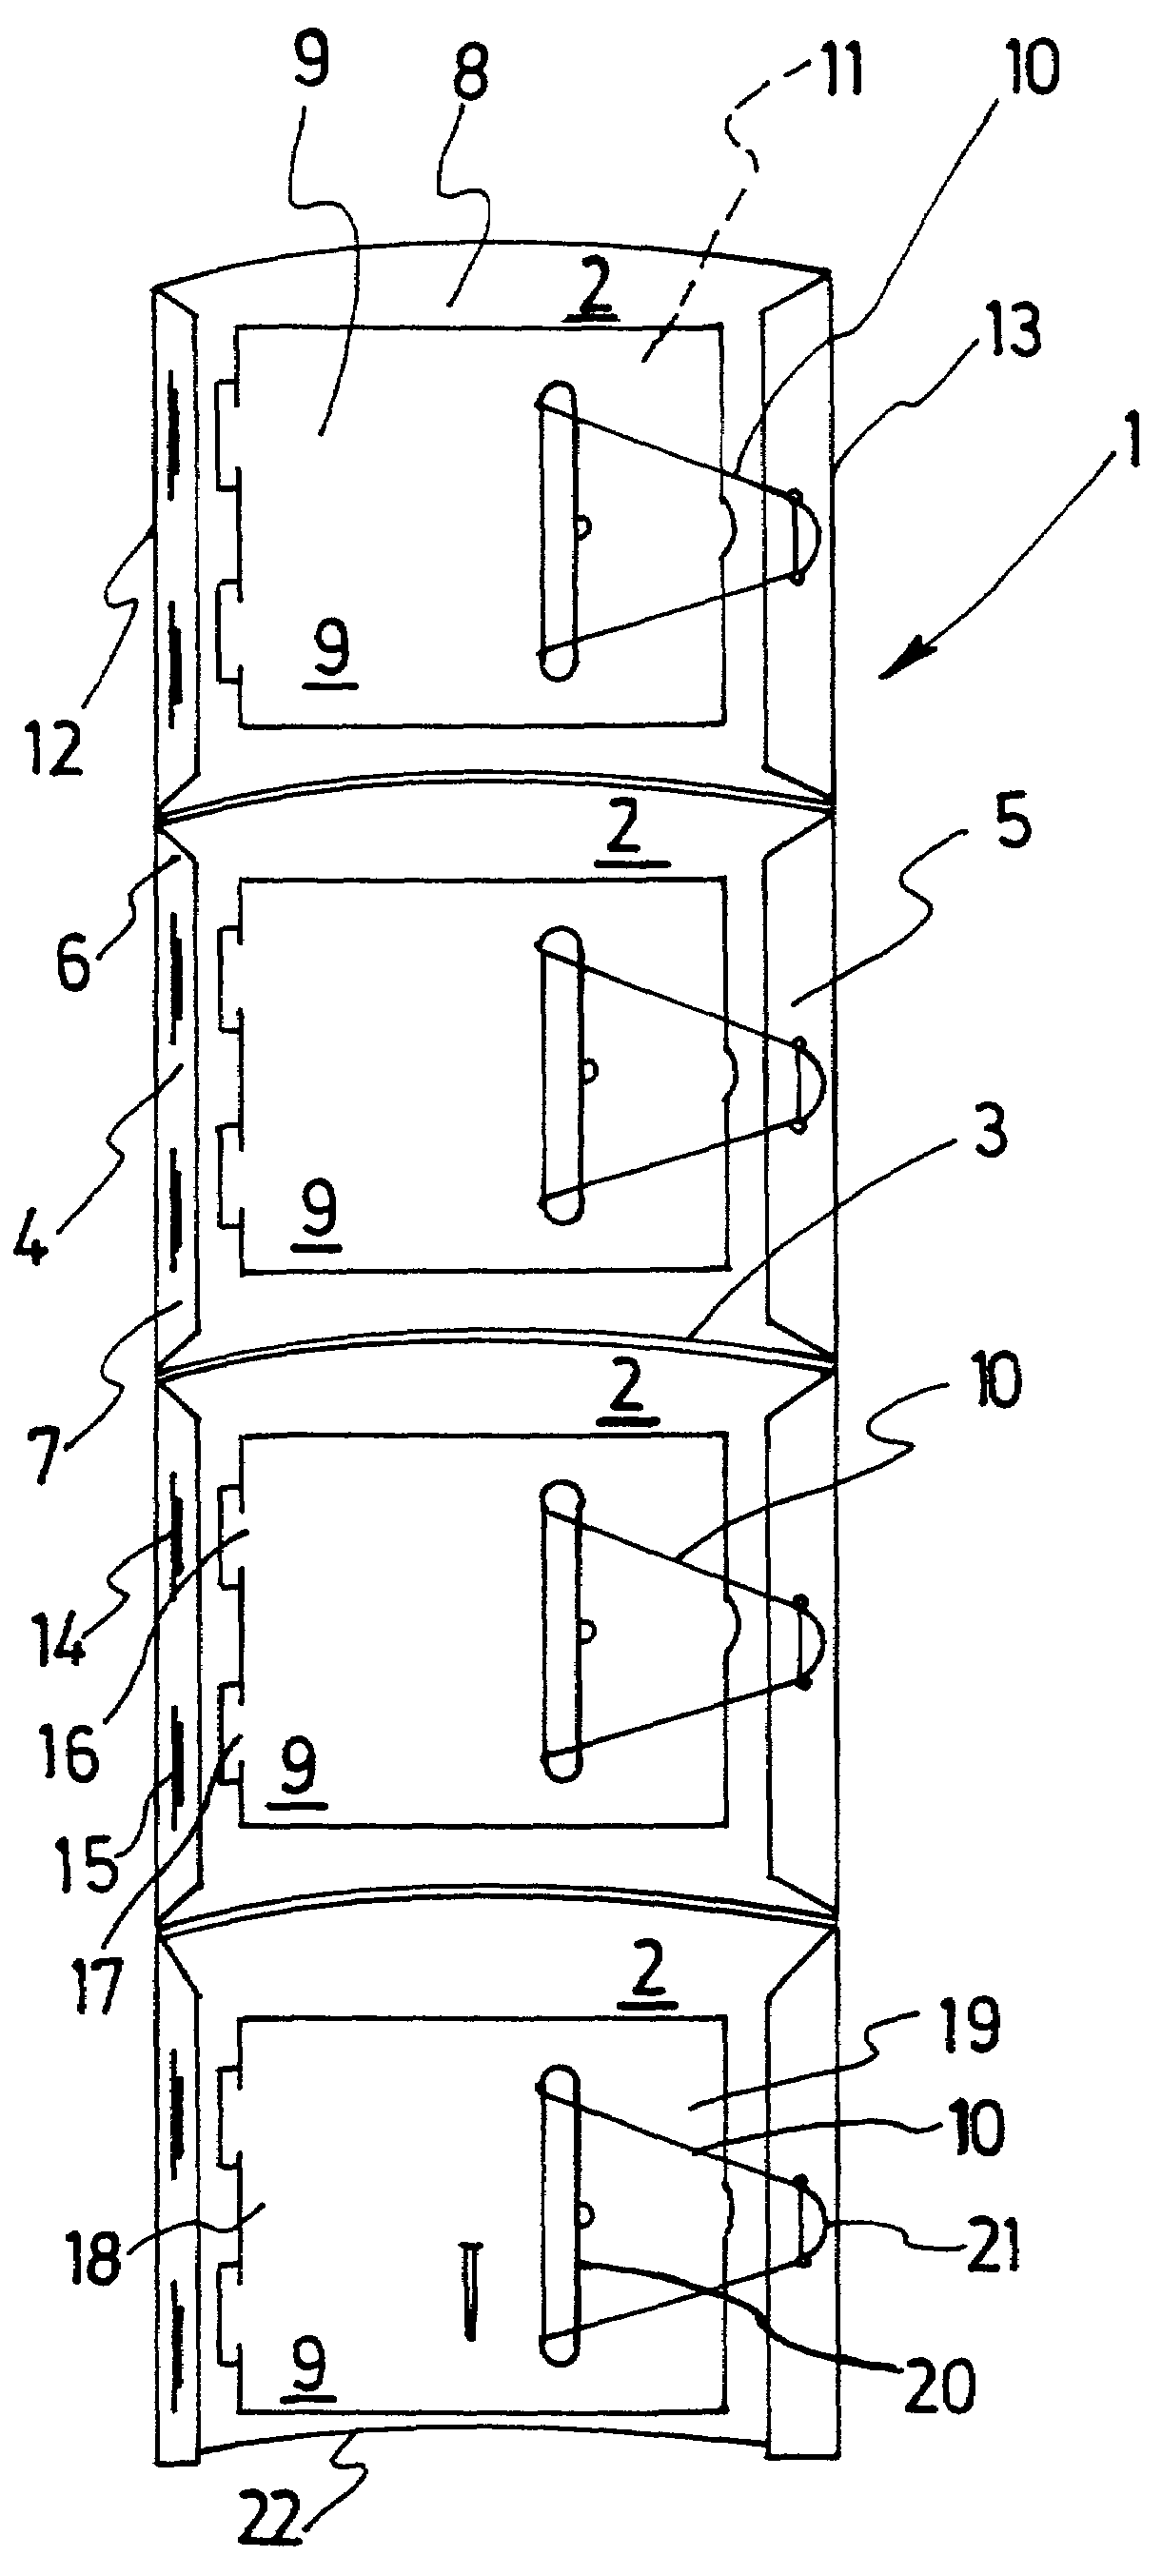 Information display unit support having at least one presentation face